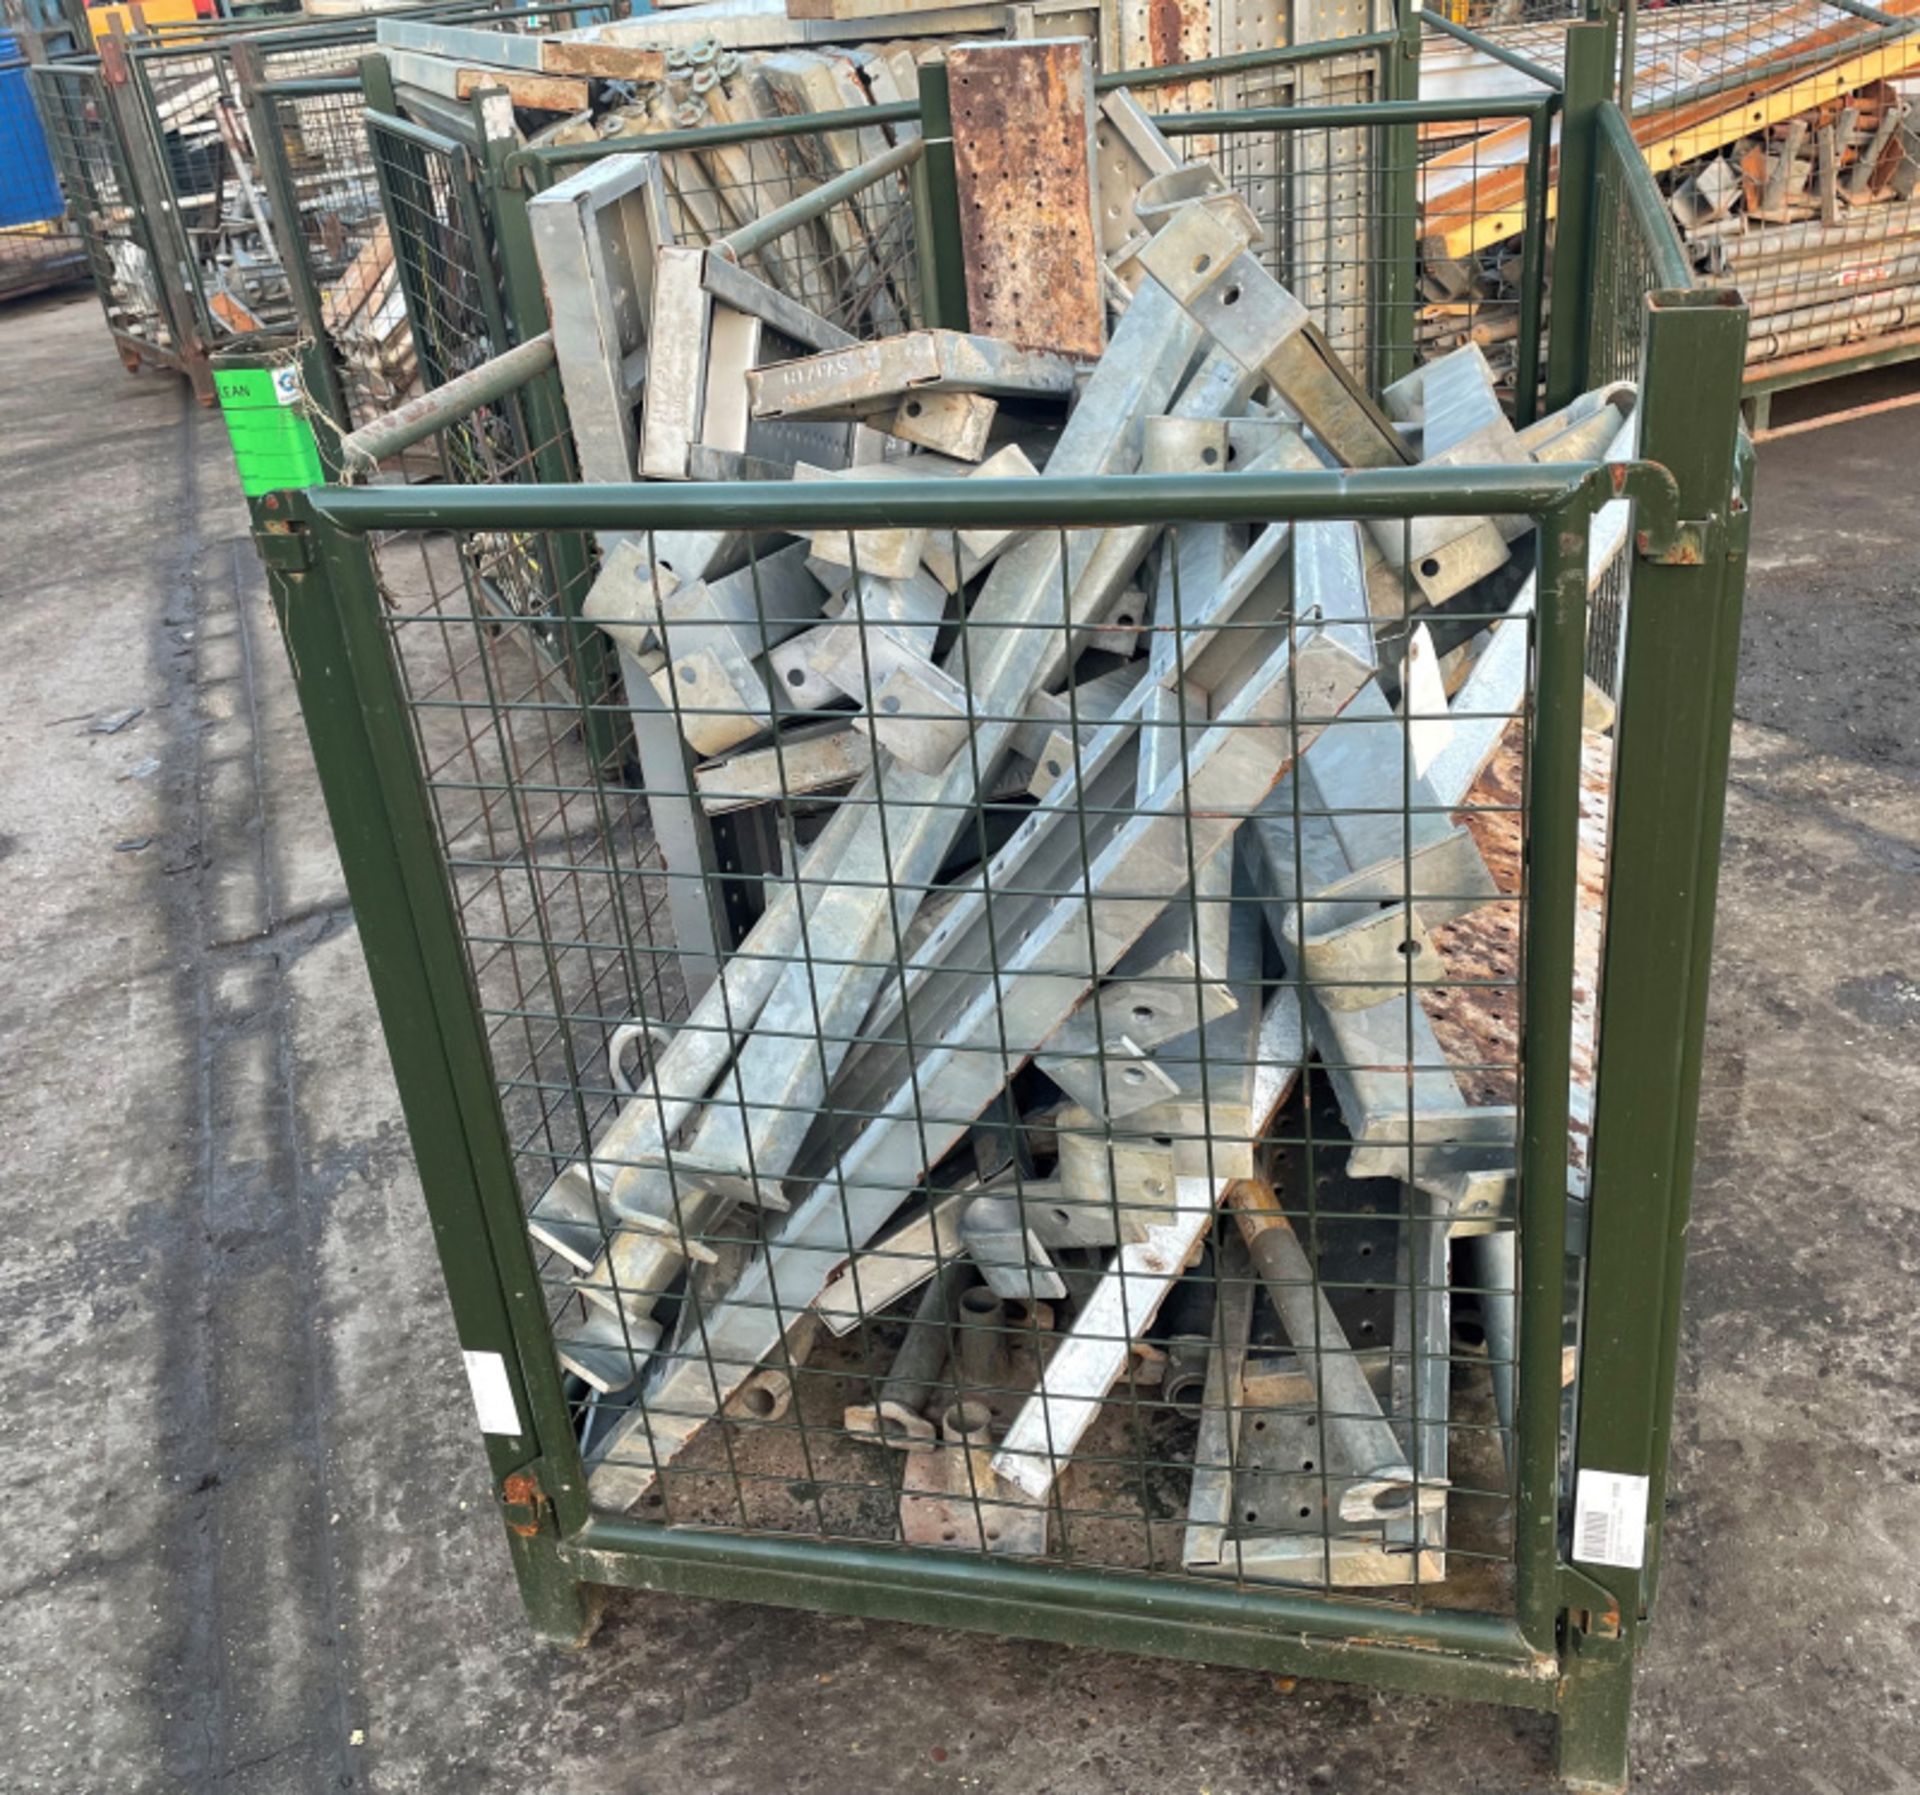 Various Cuplok scaffolding components - poles, planks, connectors - see pictures for more details - Image 26 of 38